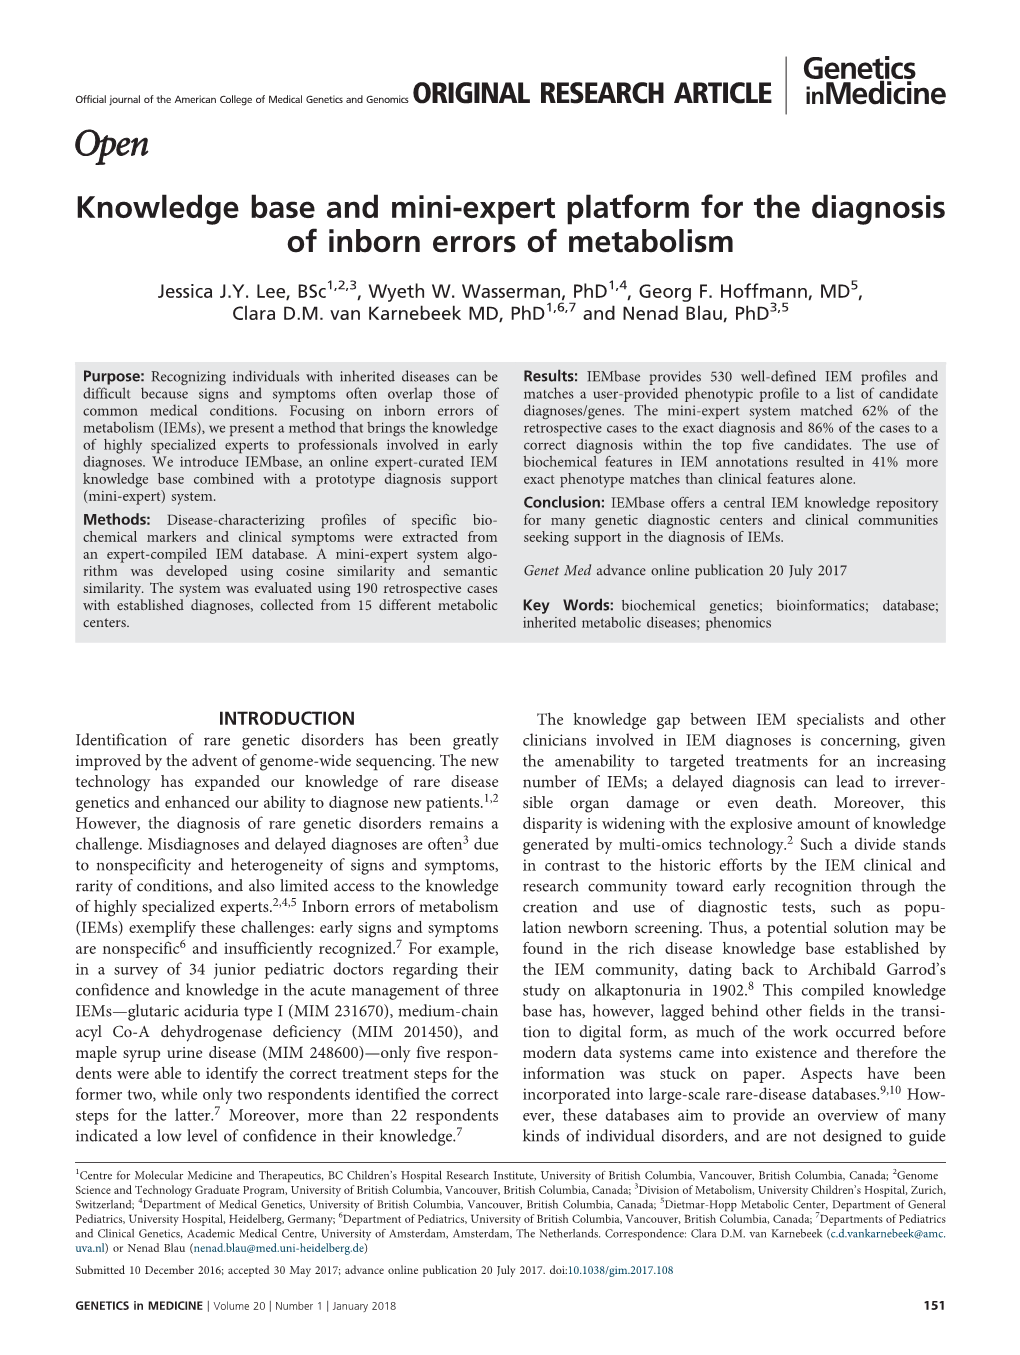 Knowledge Base and Mini-Expert Platform for the Diagnosis of Inborn Errors of Metabolism